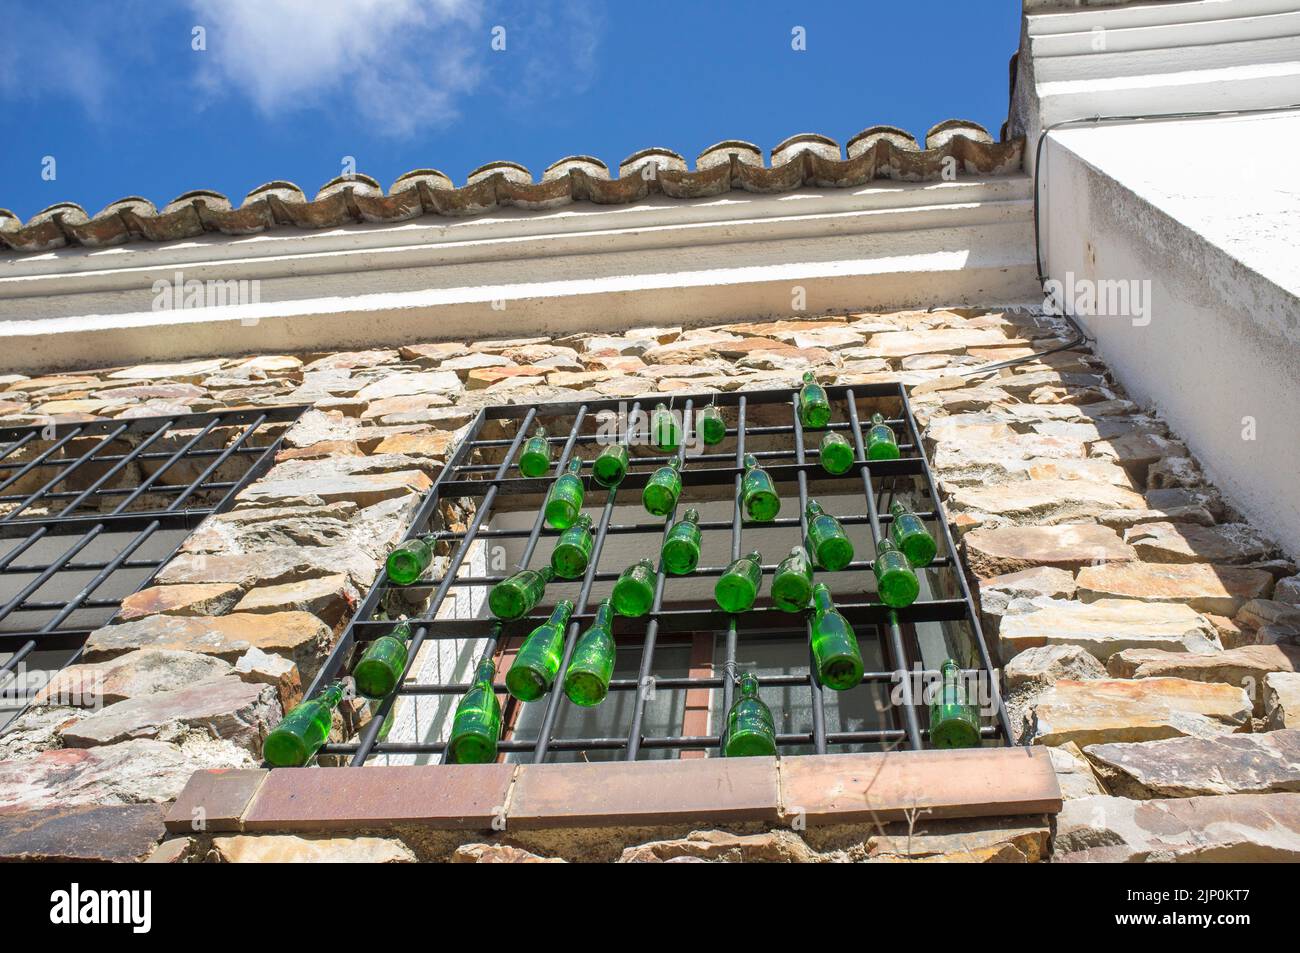 Rural residence house window decorared with hanging green glass bottles. Low angle view Stock Photo